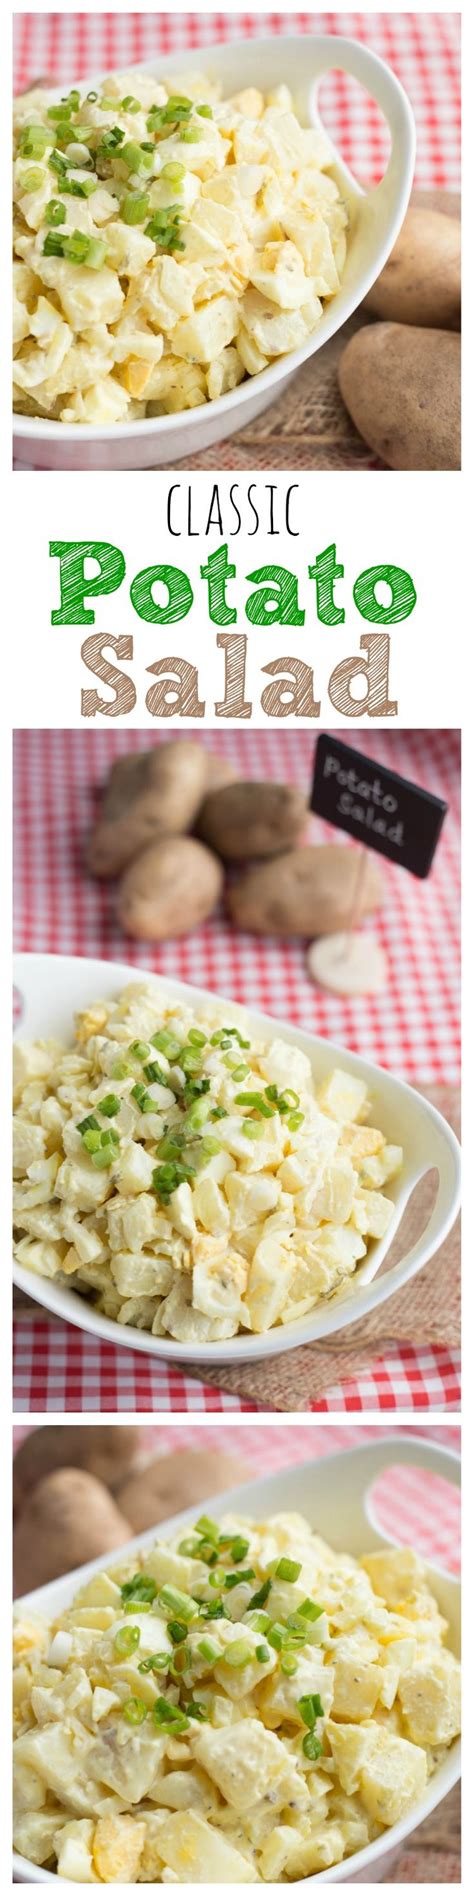 The potatoes will absorb a lot of moisture, and you want a creamy salad. Classic Mustard Potato Salad | Recipe | Salad side dishes, Cooking recipes, Bbq recipes